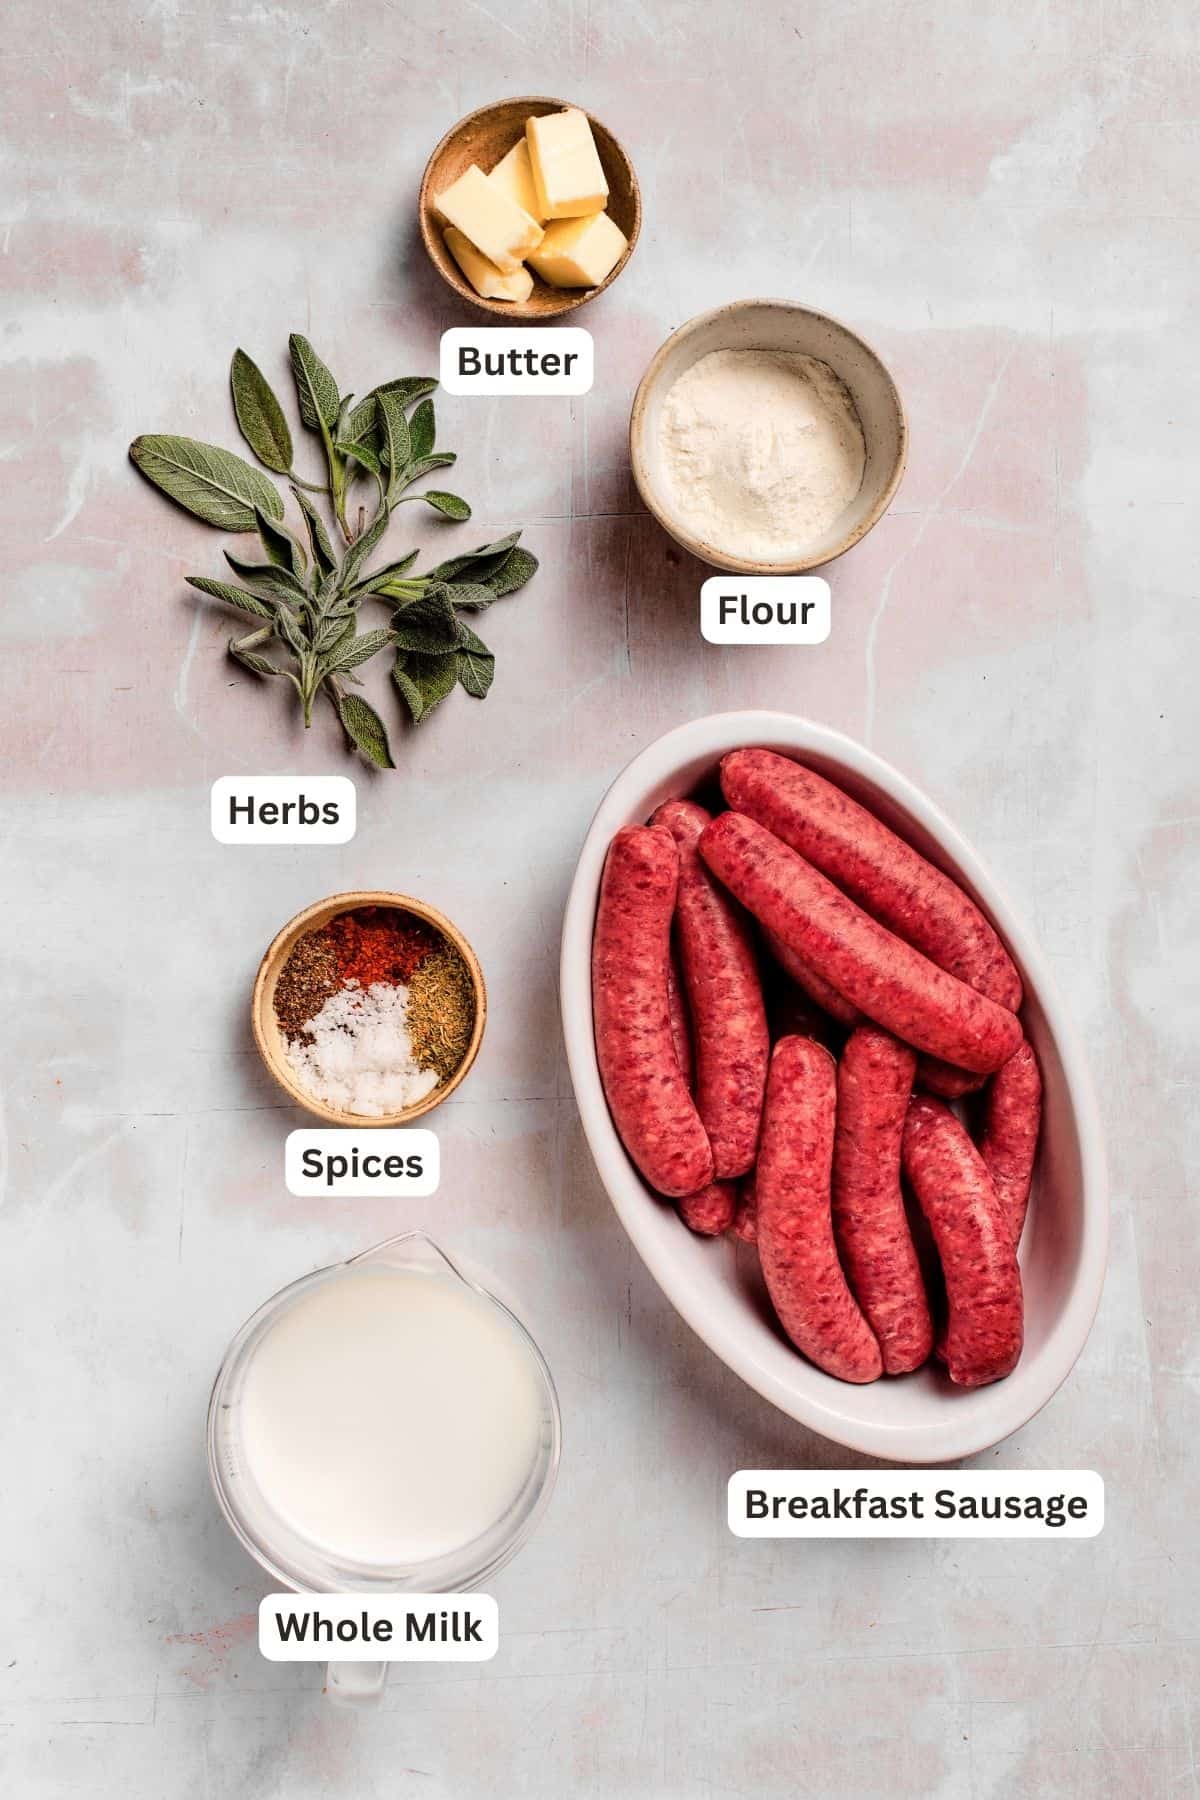 Ingredients for sausage and gravy biscuits are shown: flour, sausage, butter, butter, spices, herbs.